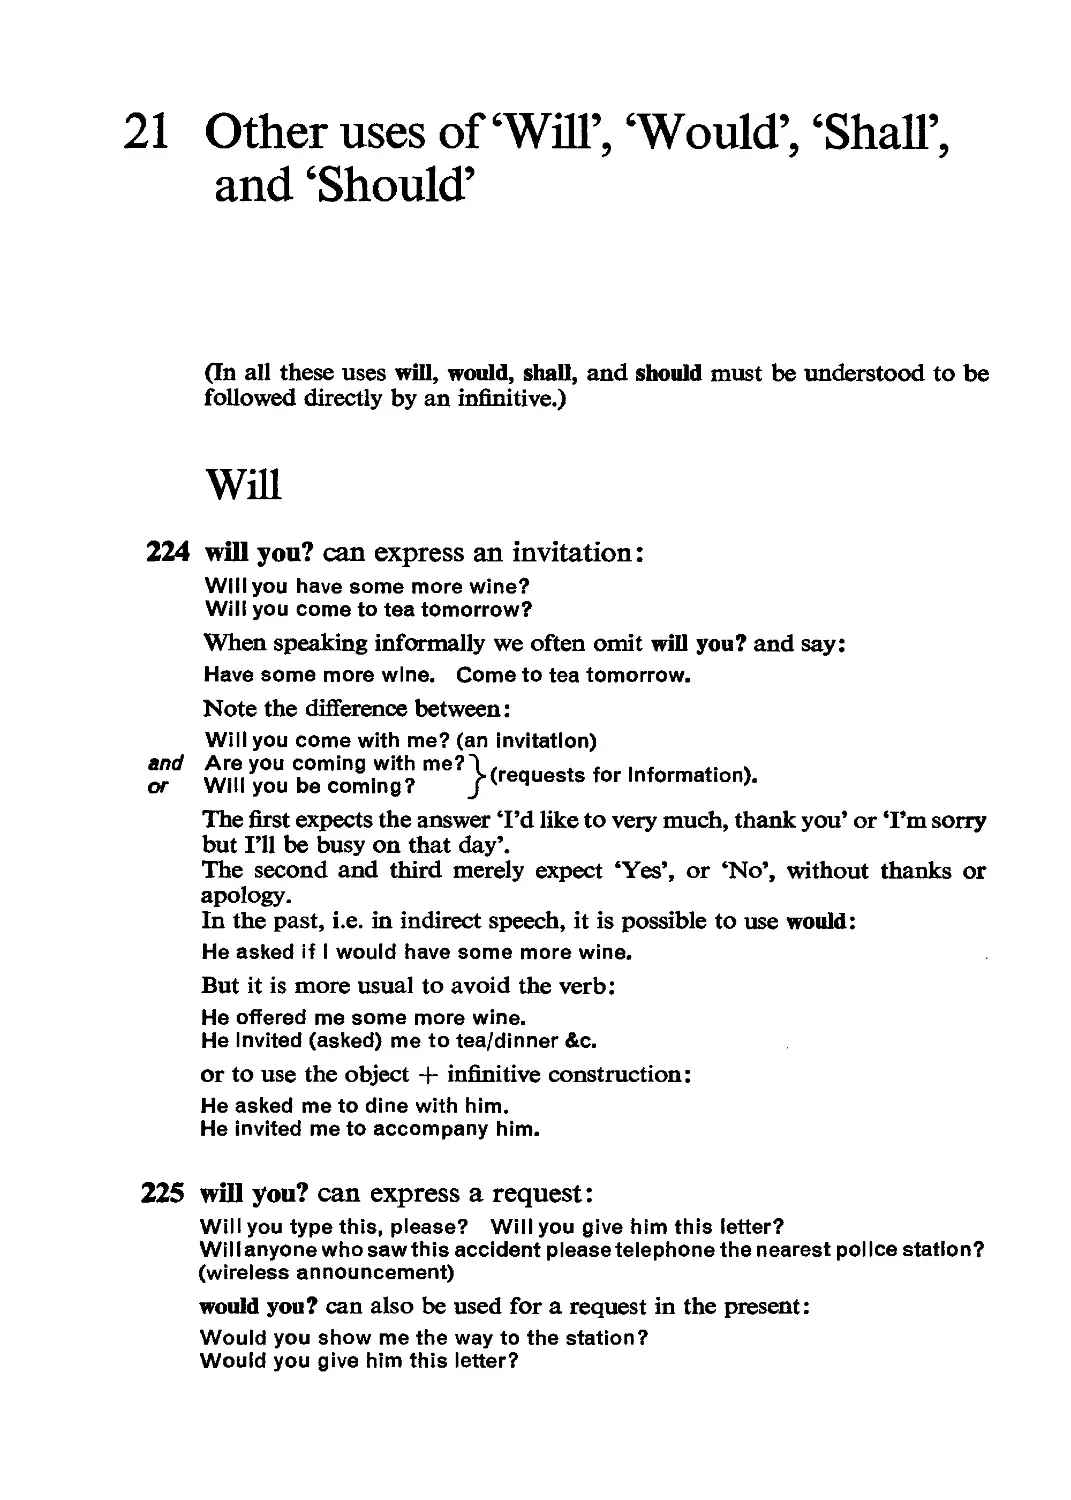 Other uses of 'will', 'would', 'shall', and 'should